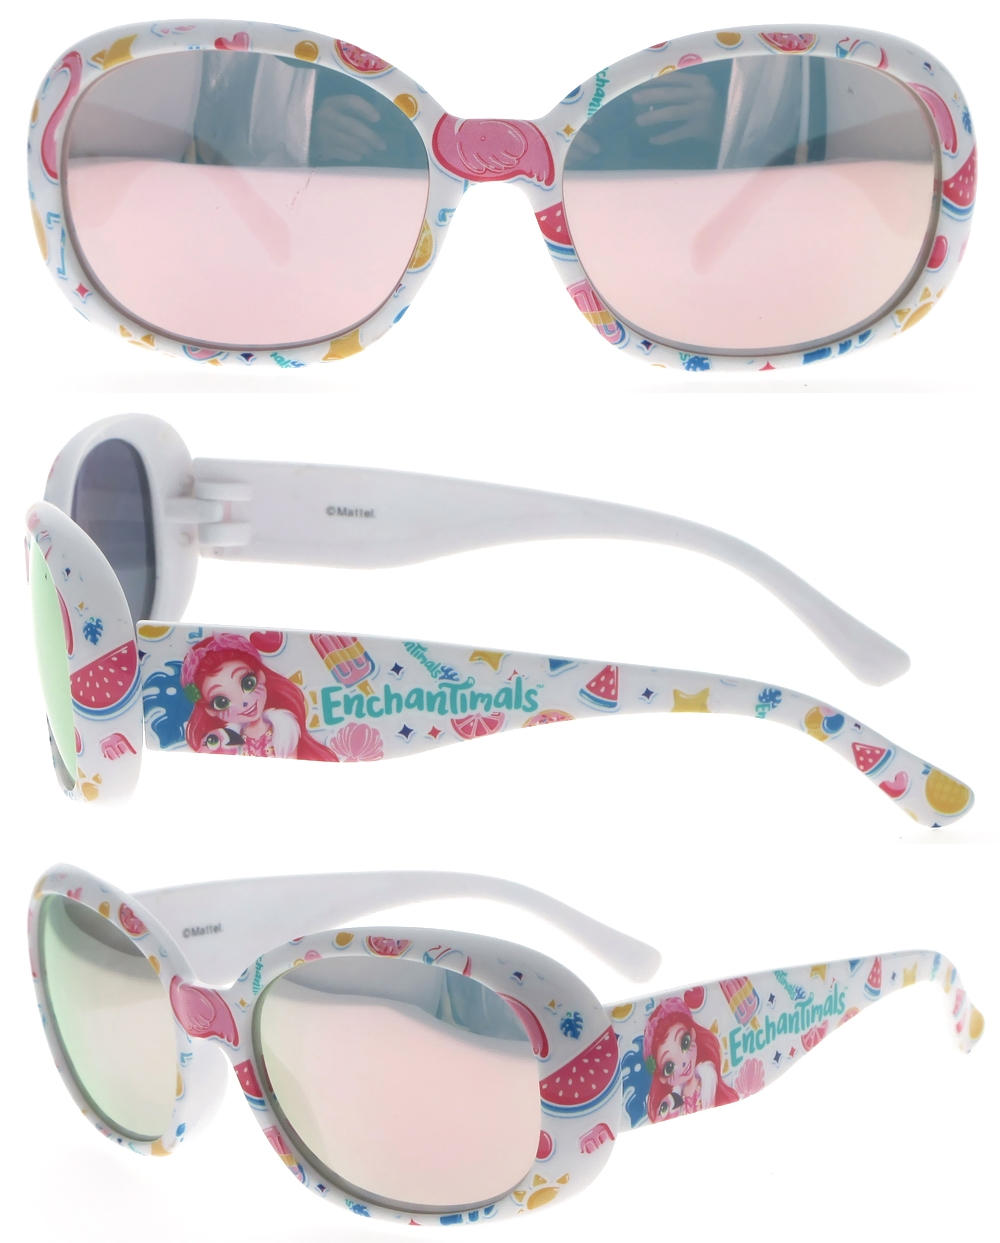 Dachuan Optical DSPK342036 China Manufacture Factory Cute Sports Style Kids Sunglasses with Pattern Frame (1)